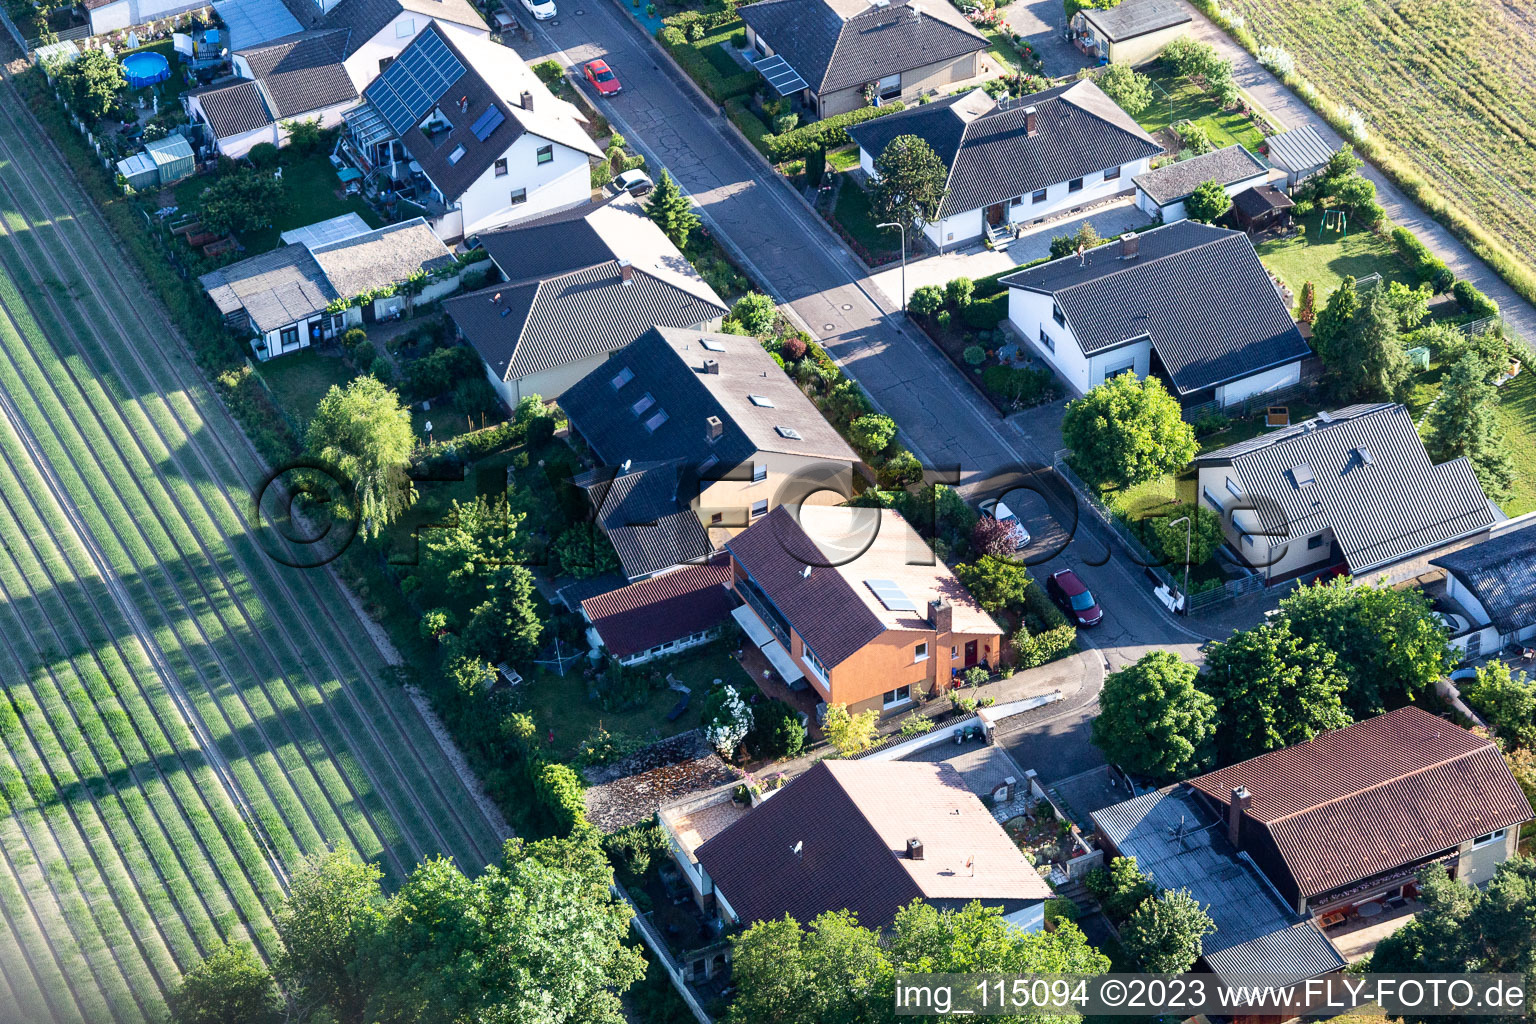 Aerial photograpy of Ringstr in the district Hayna in Herxheim bei Landau/Pfalz in the state Rhineland-Palatinate, Germany